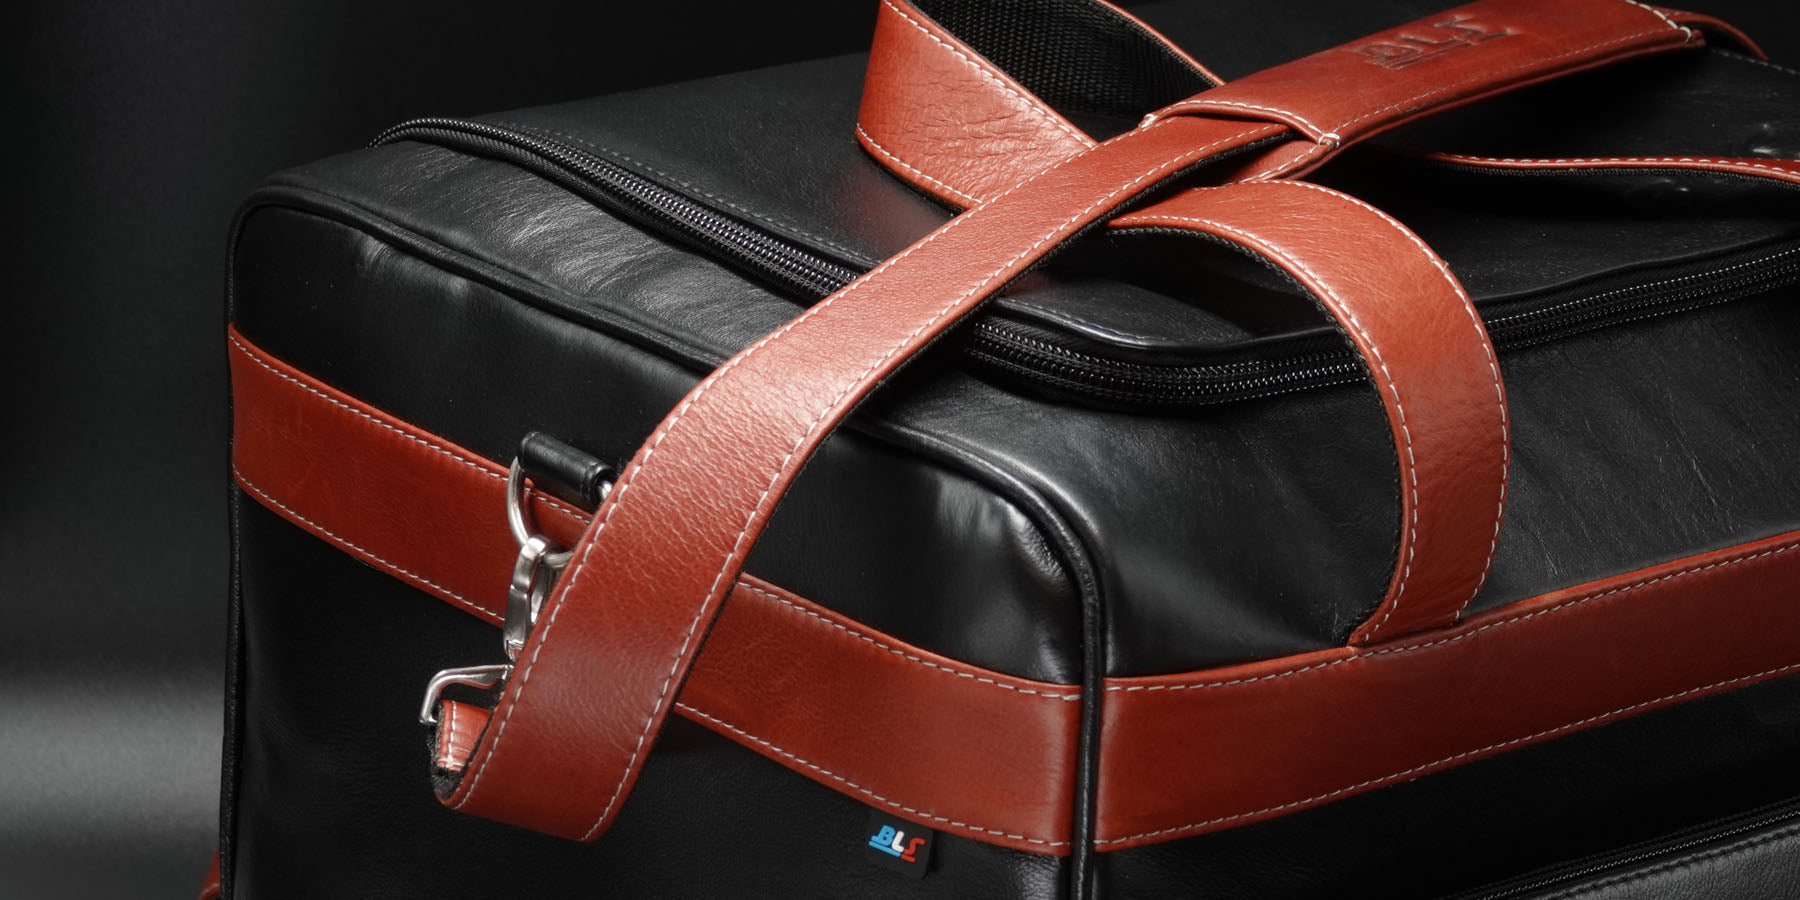 Cycling Bags & Accessories Tiwia Leather Range. Leather cycling bag